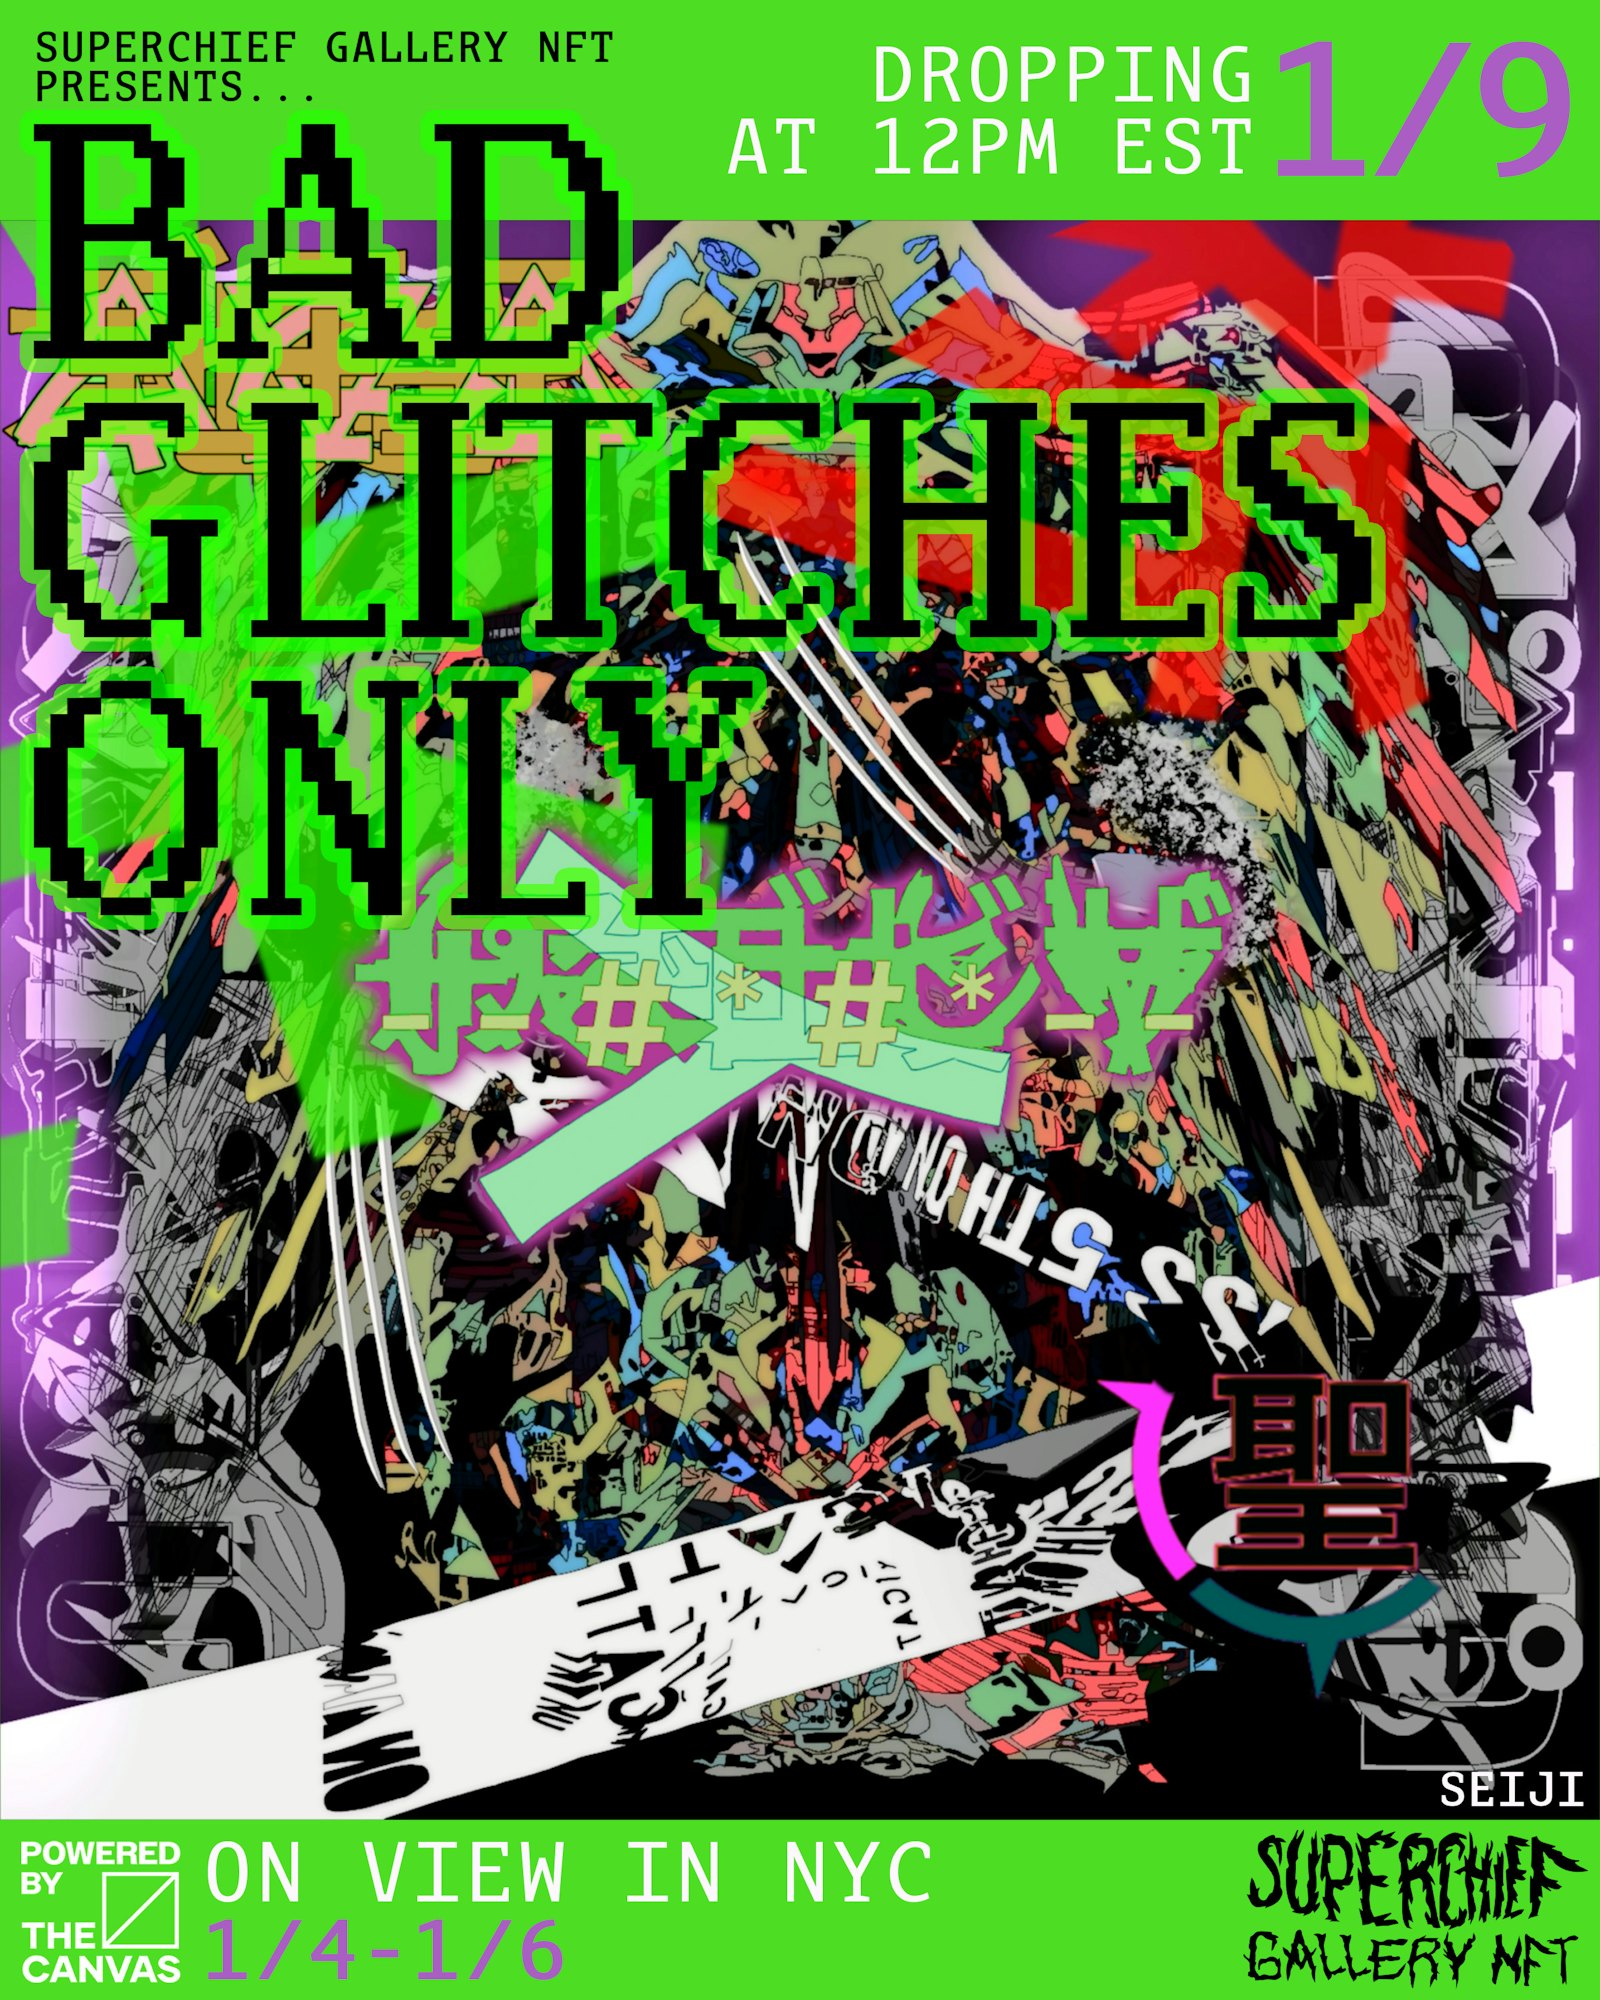 Bad Glitches Only 1.9.24